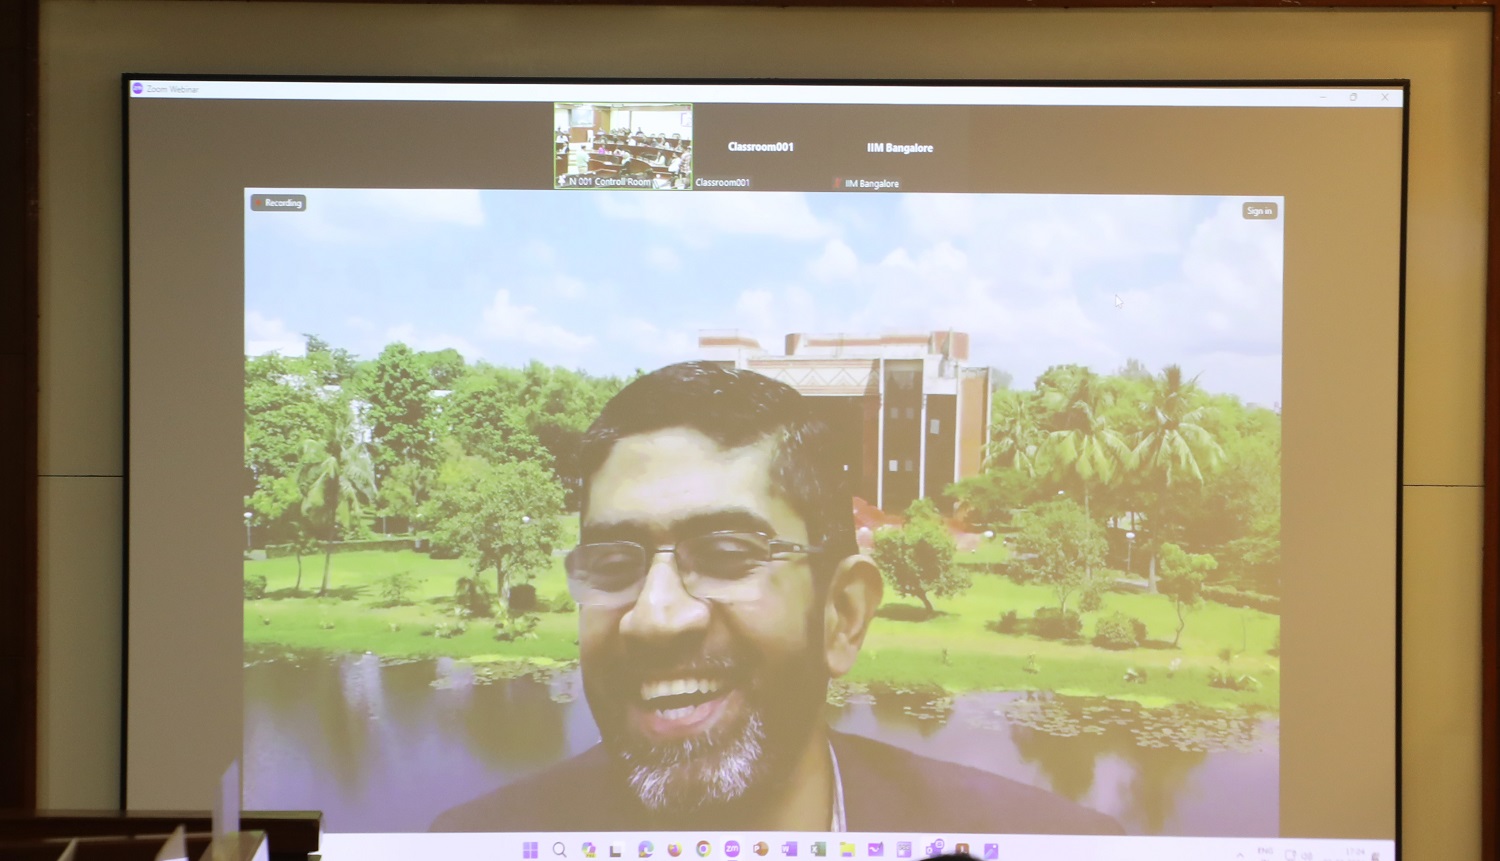 Prof. Balram Avittathur from the Operations Management Group at IIM Calcutta delivered the second keynote address virtually on 'Managing the research and teaching challenges in an academic career' at the IMR Doctoral Conference (IMRDC).